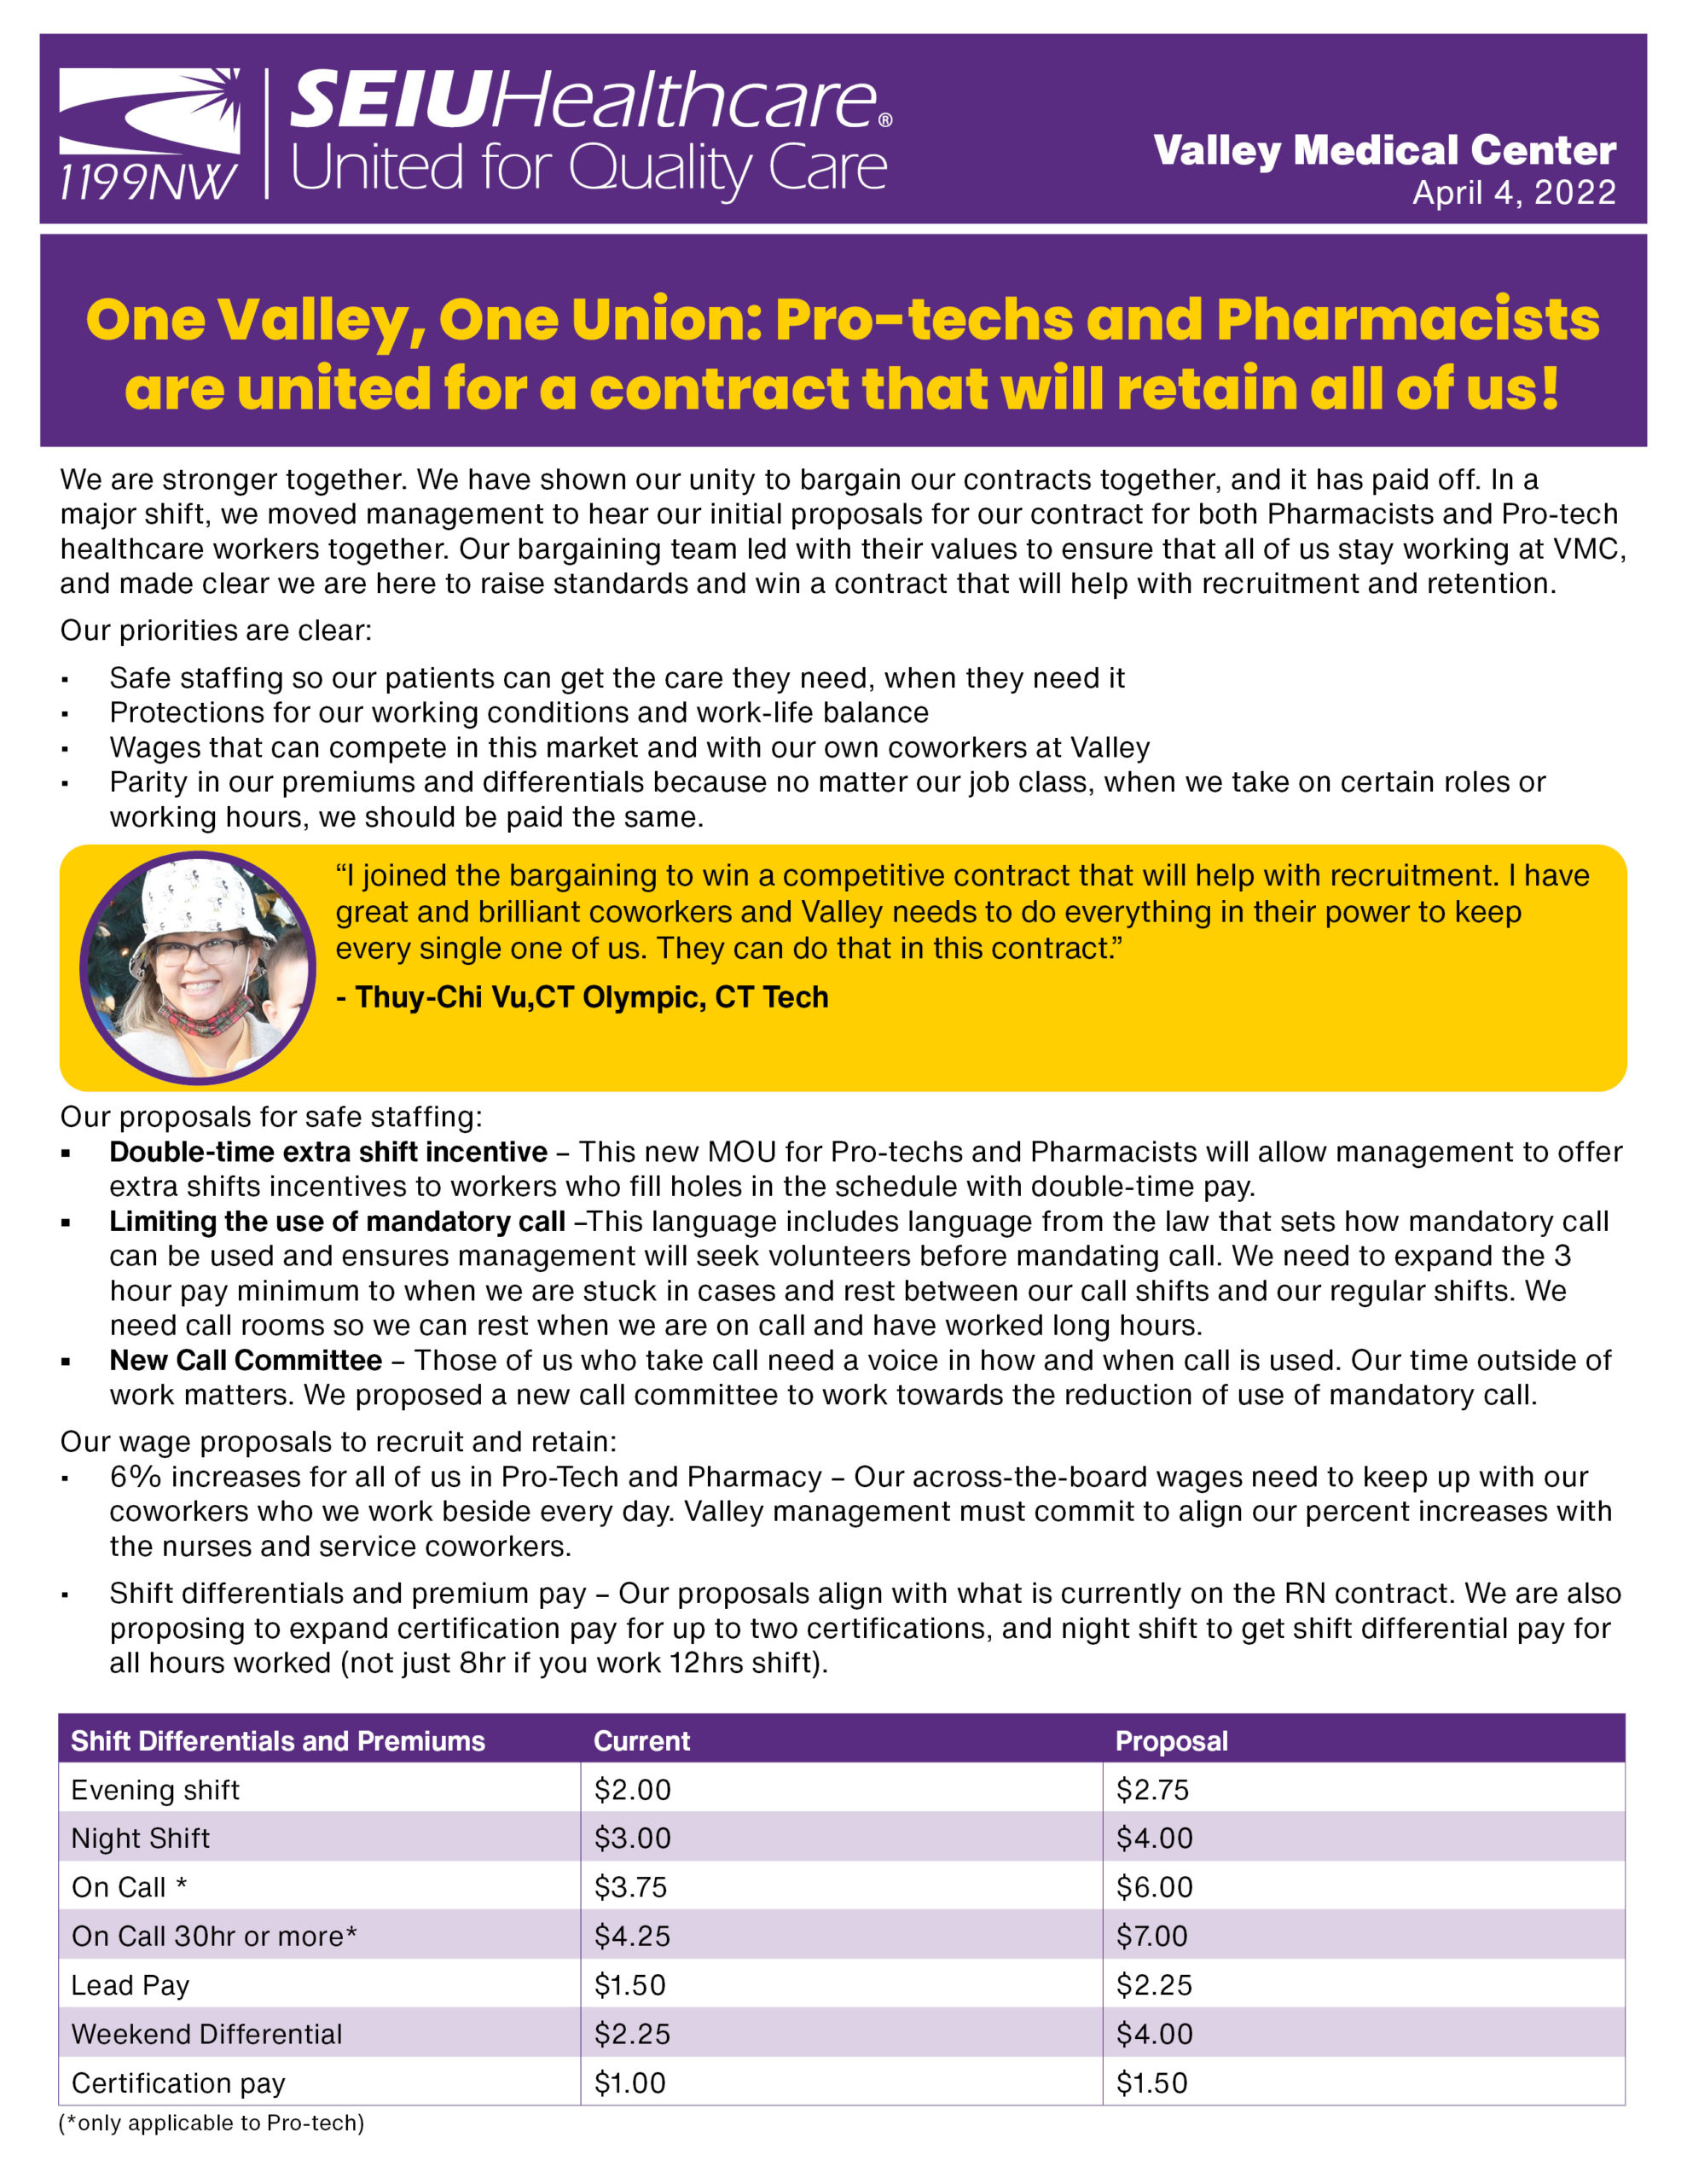 One Valley, One Union: Pro-techs and Pharmacists are united for a contract that will retain all of us!